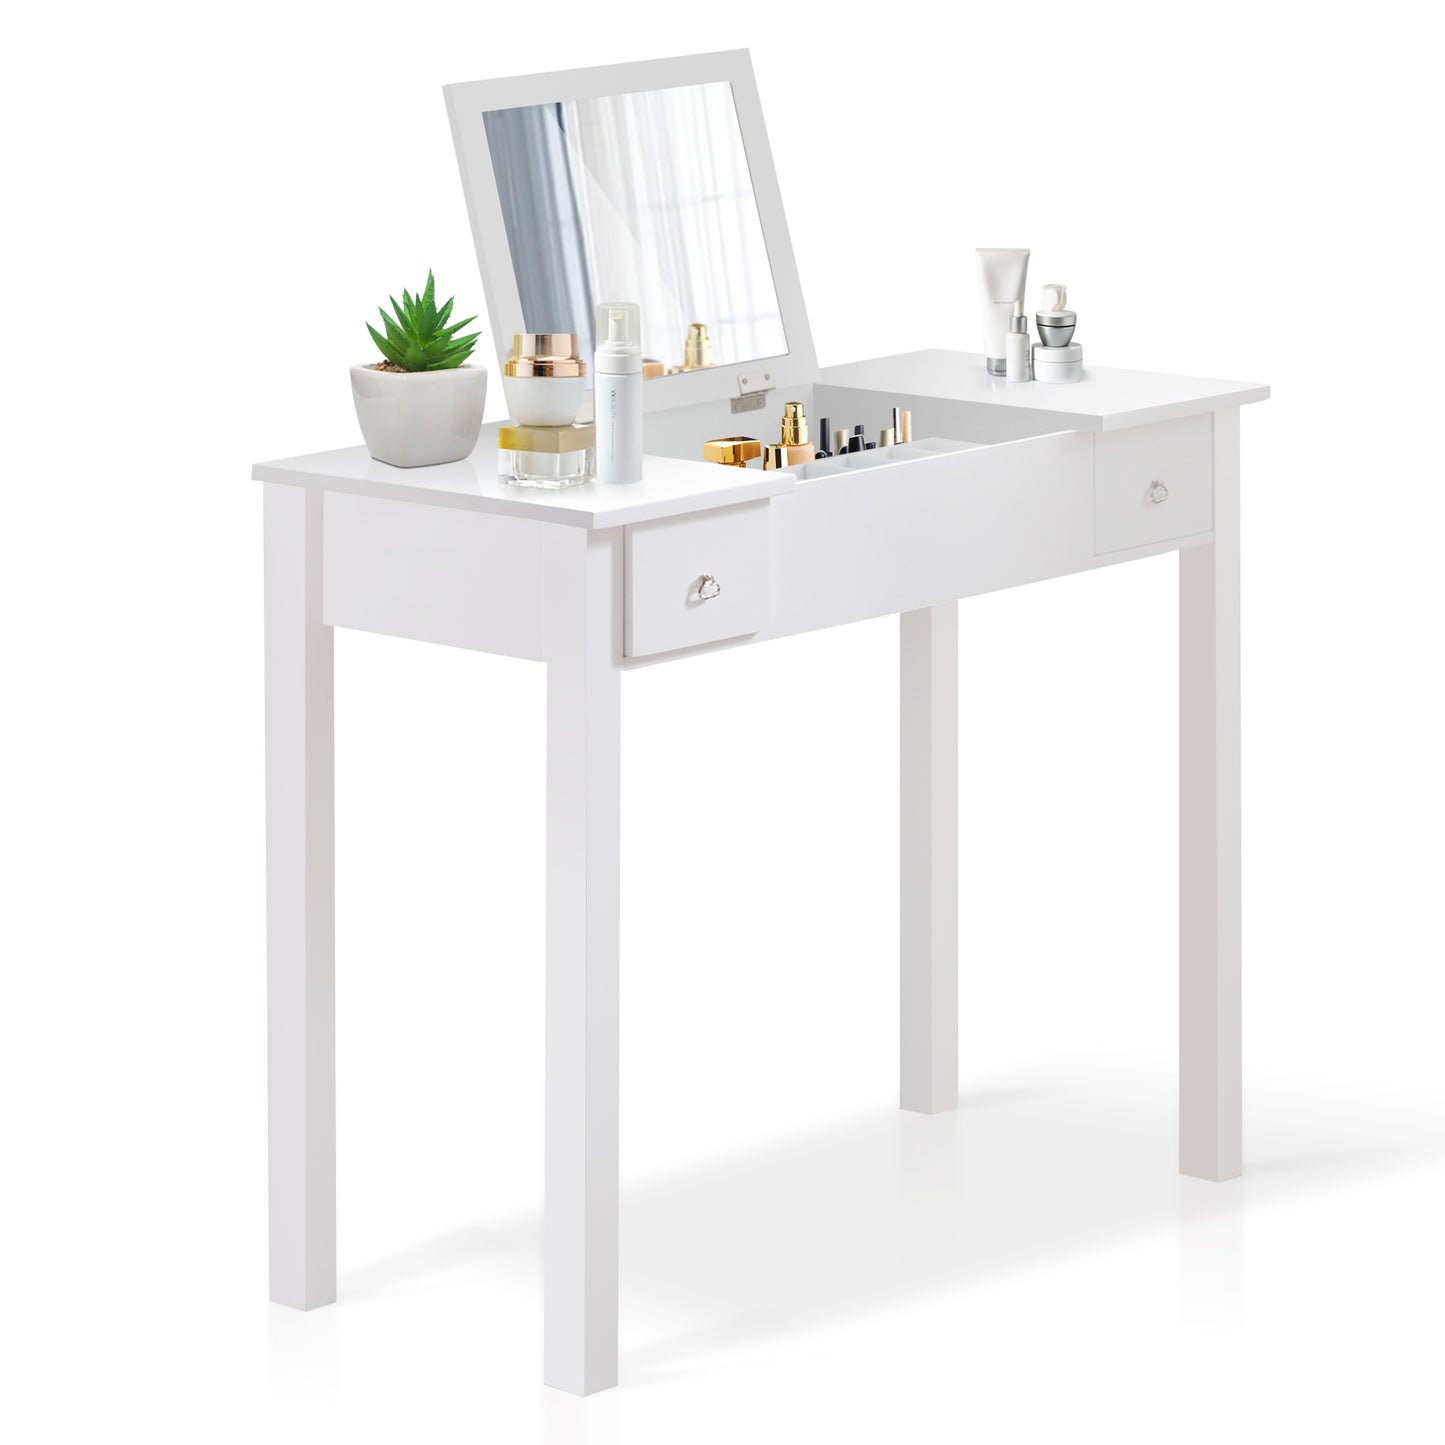 Accent White Vanity Table Set with Upholstered Stool and Flip-Top Mirror and 2 Drawers, Jewelry Storage for Women Dressing